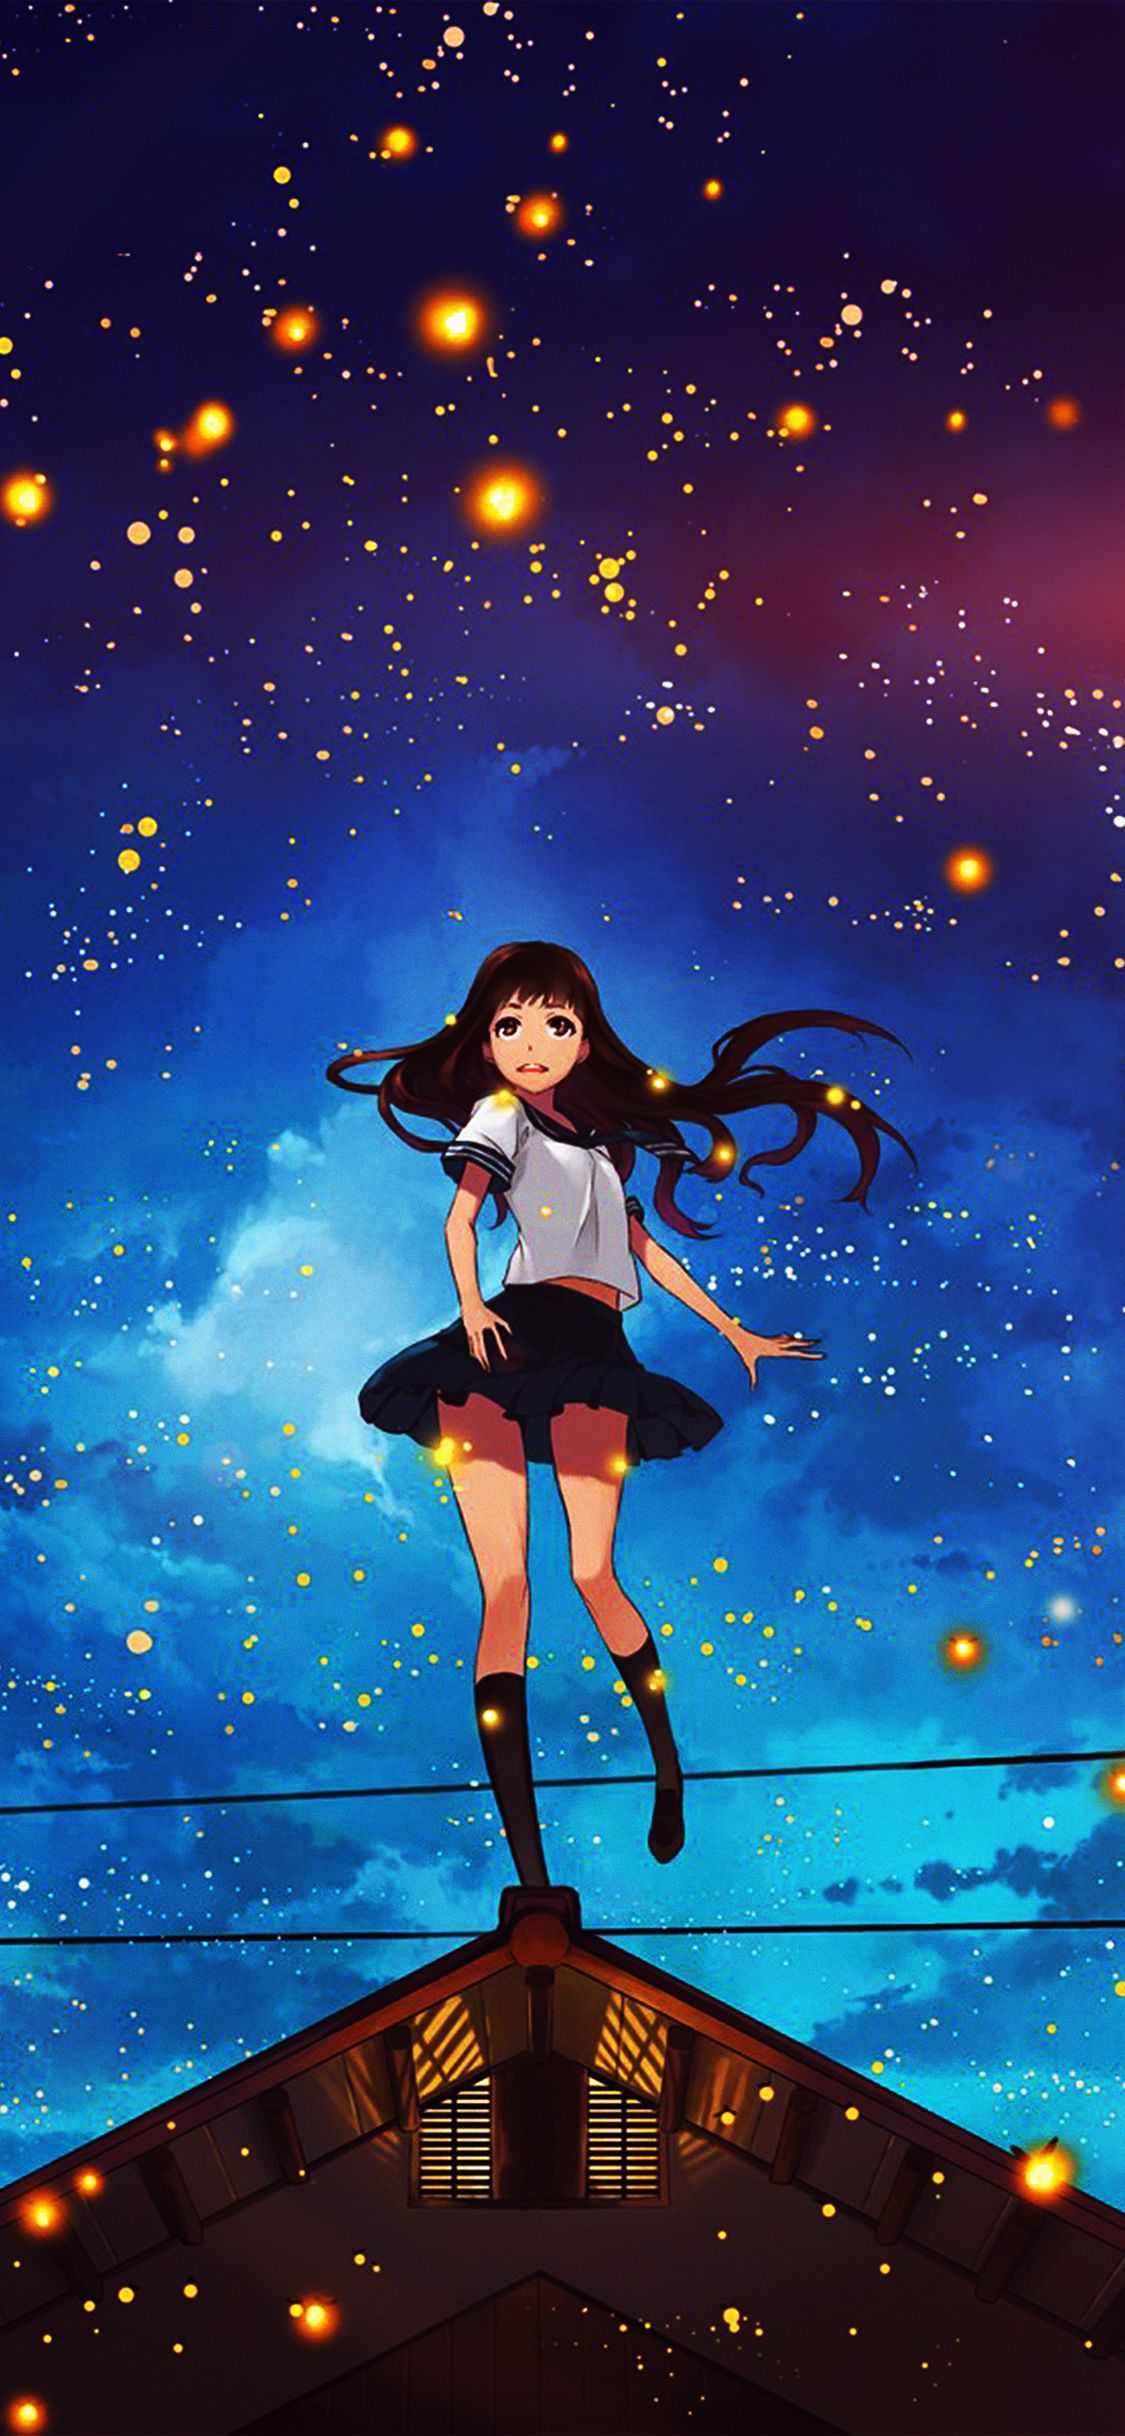 Best Coolest Anime 4k Wallpaper For Iphone Download - Free HD